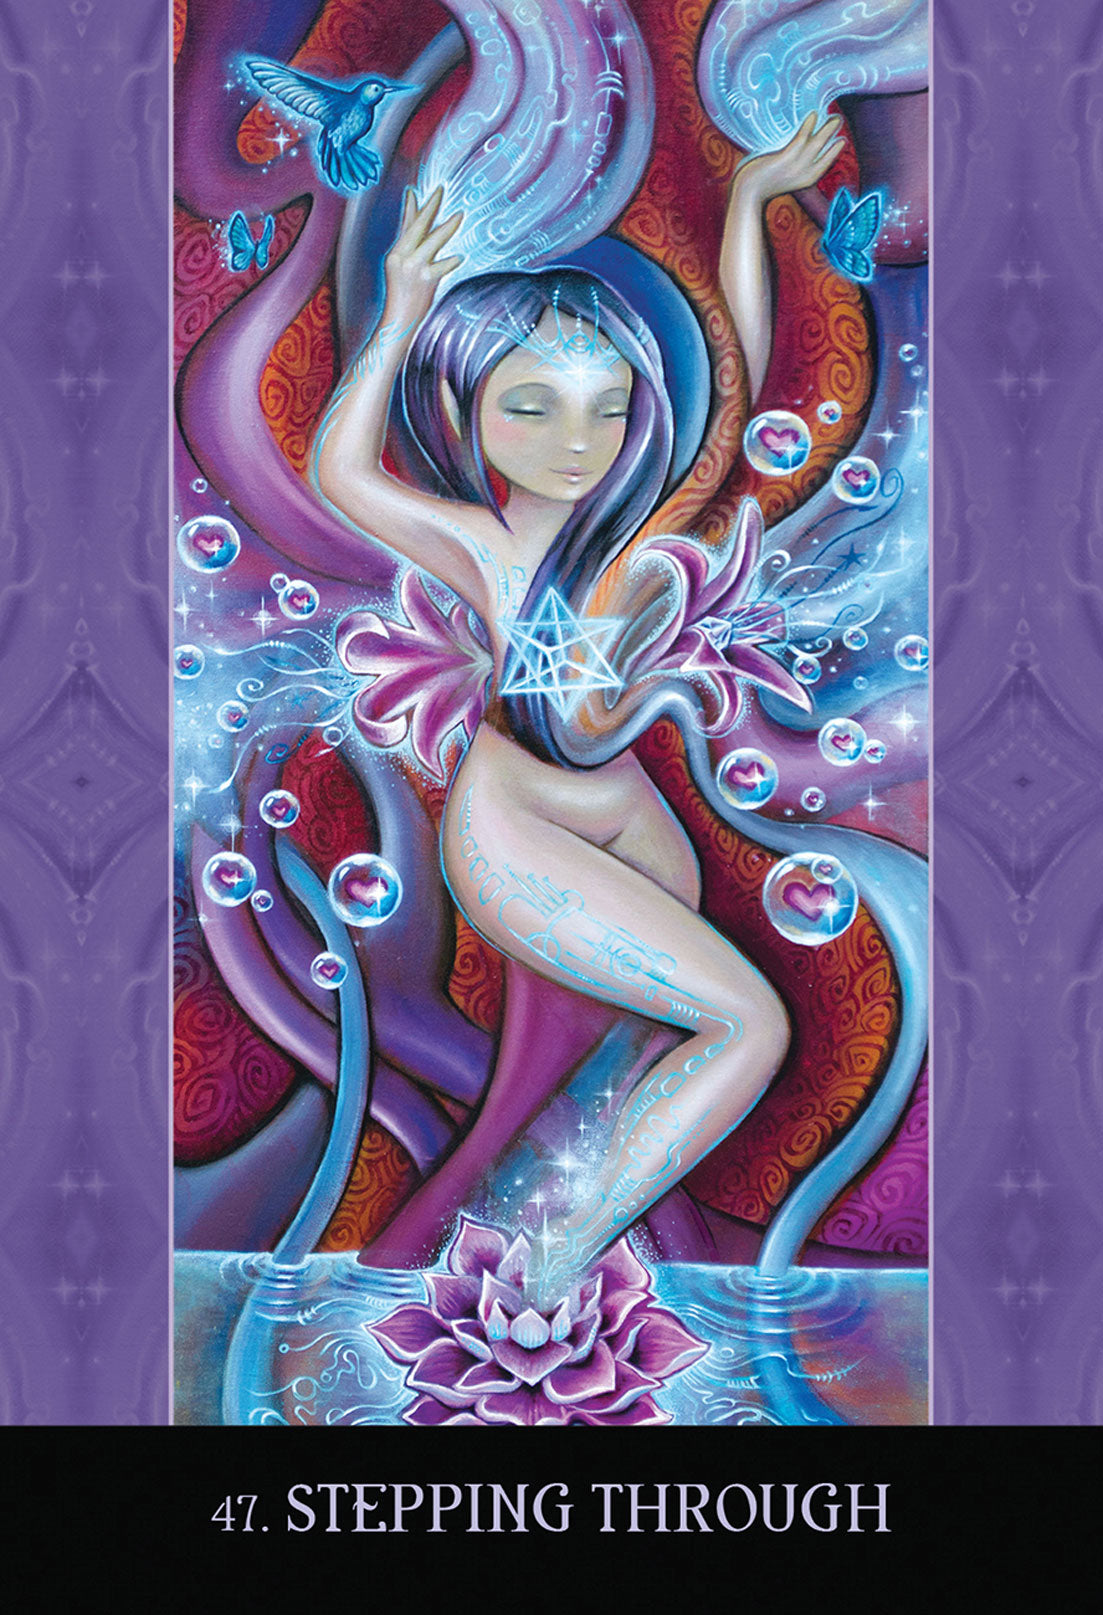 card labeled "stepping through." card depicts a nude woman with her hair covering her breasts walking through a body of water and pushing through flowering vines. She is standing on a lotus flower.